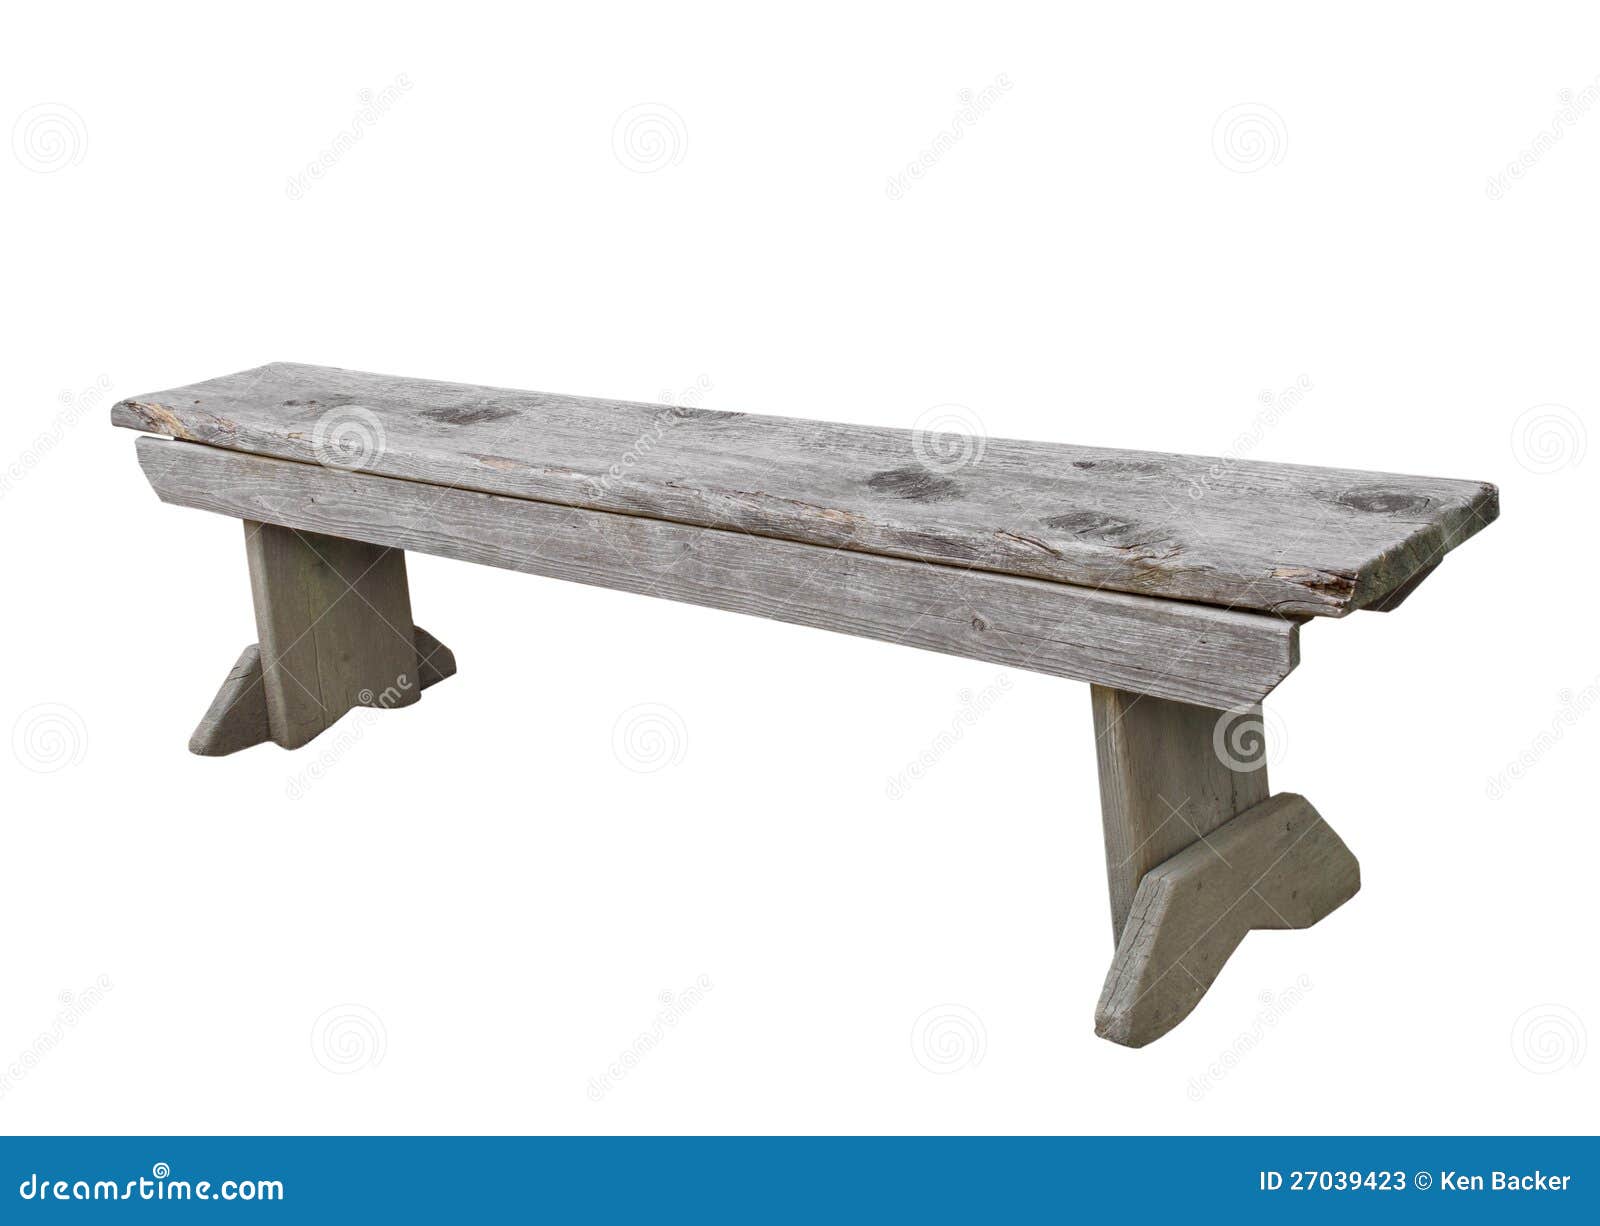 Simple weathered and worn gray wooden bench. Isolated on white.